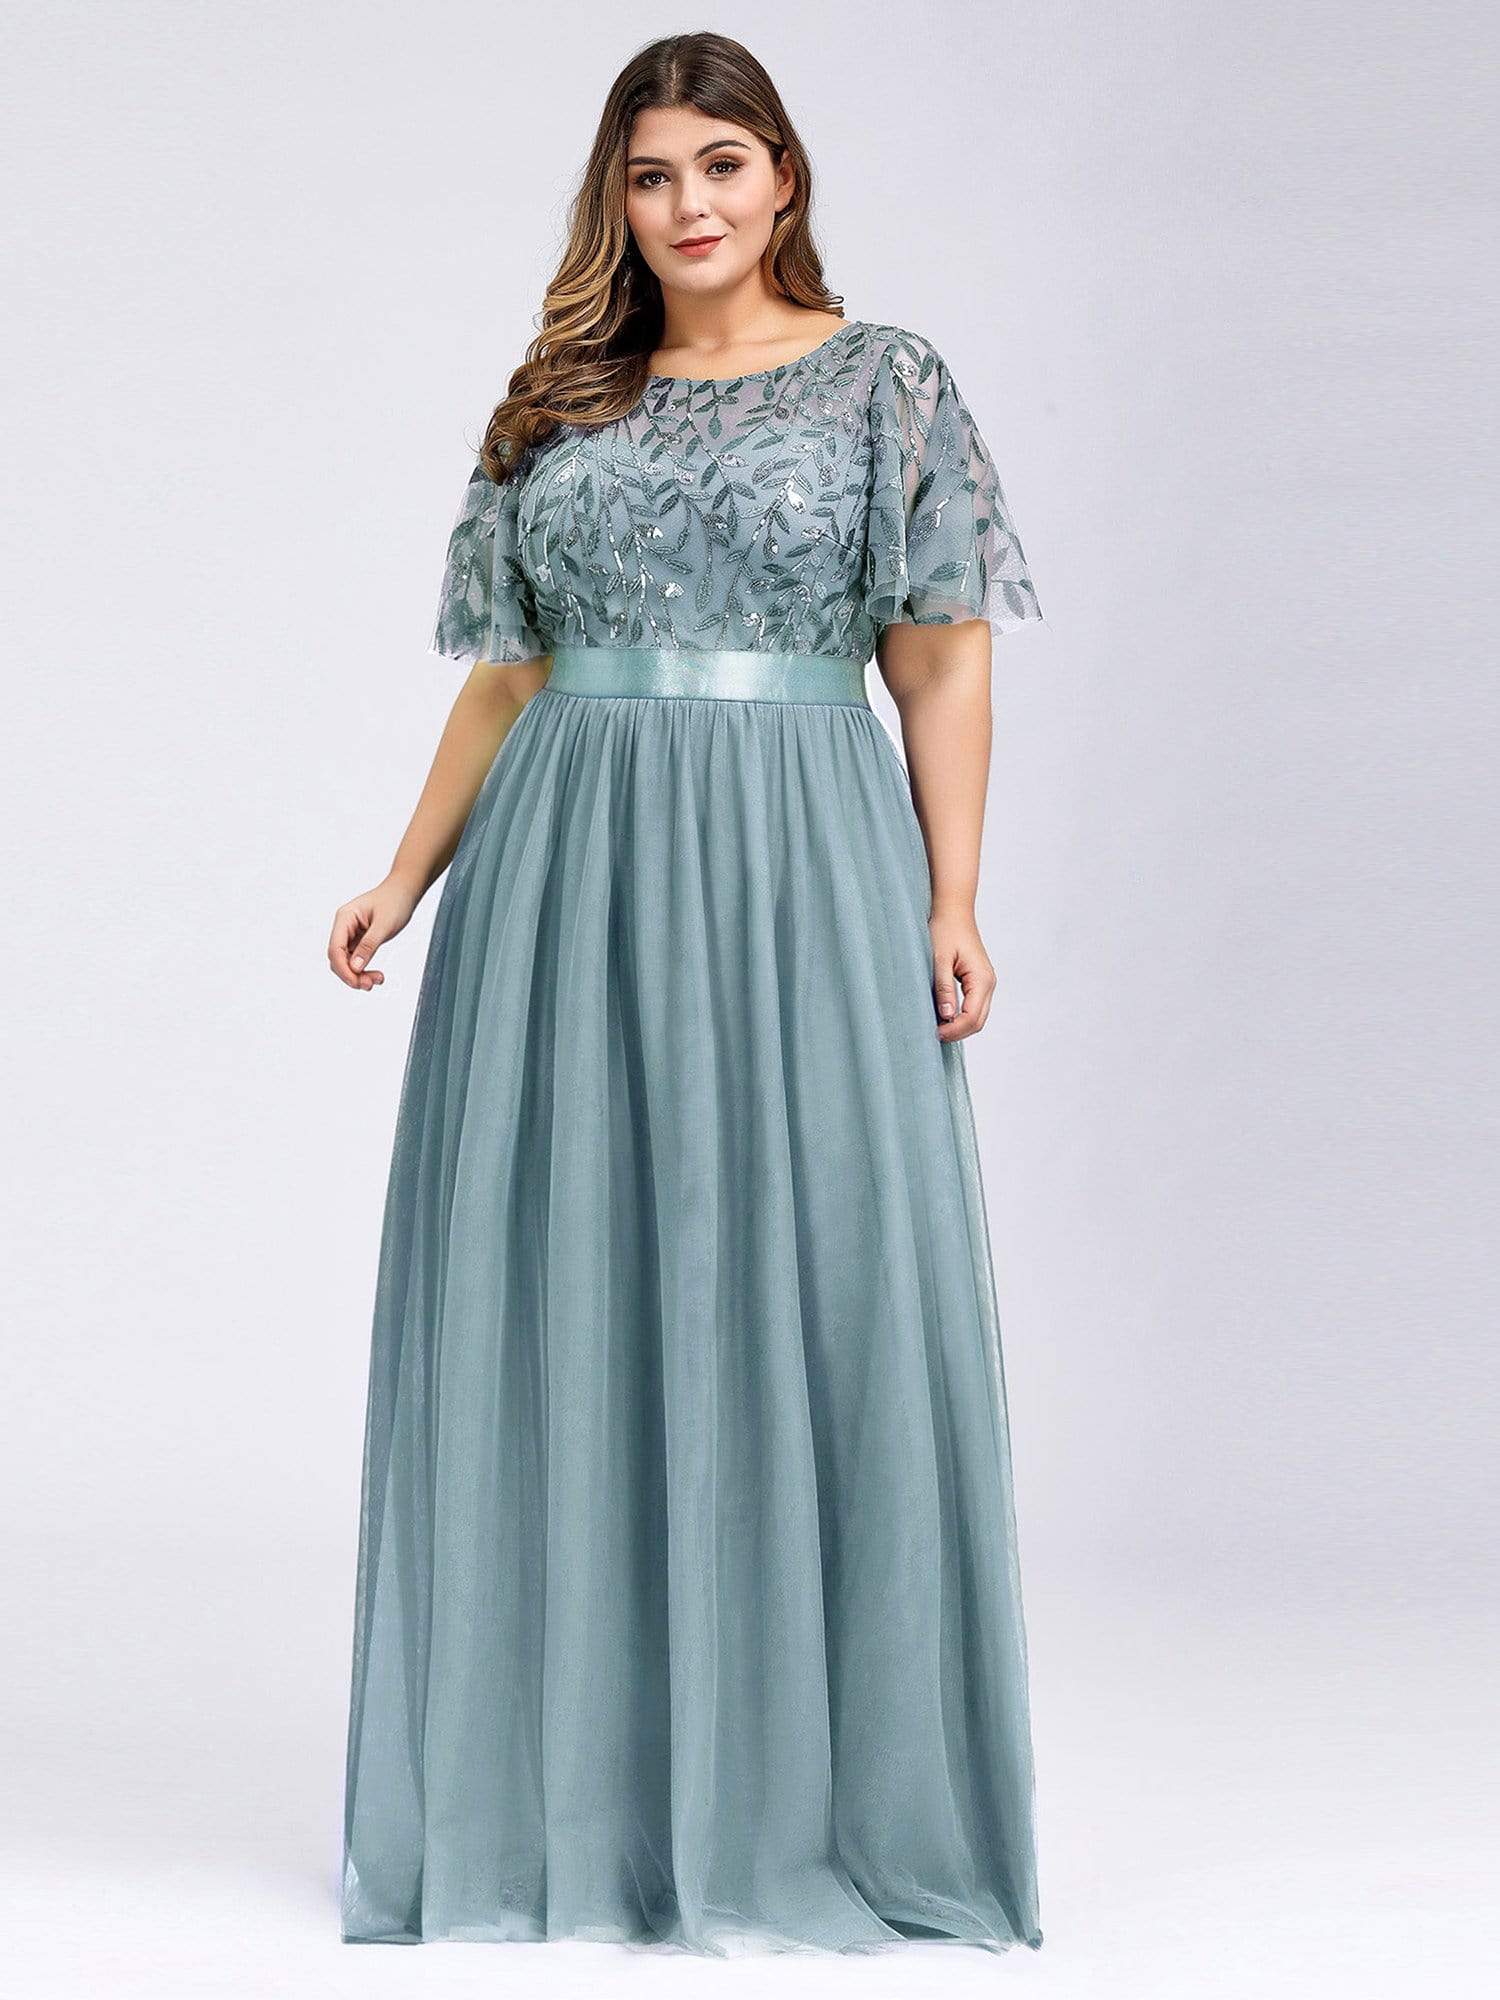 Plus Size Women's Embroidery Evening Dresses with Short Sleeve